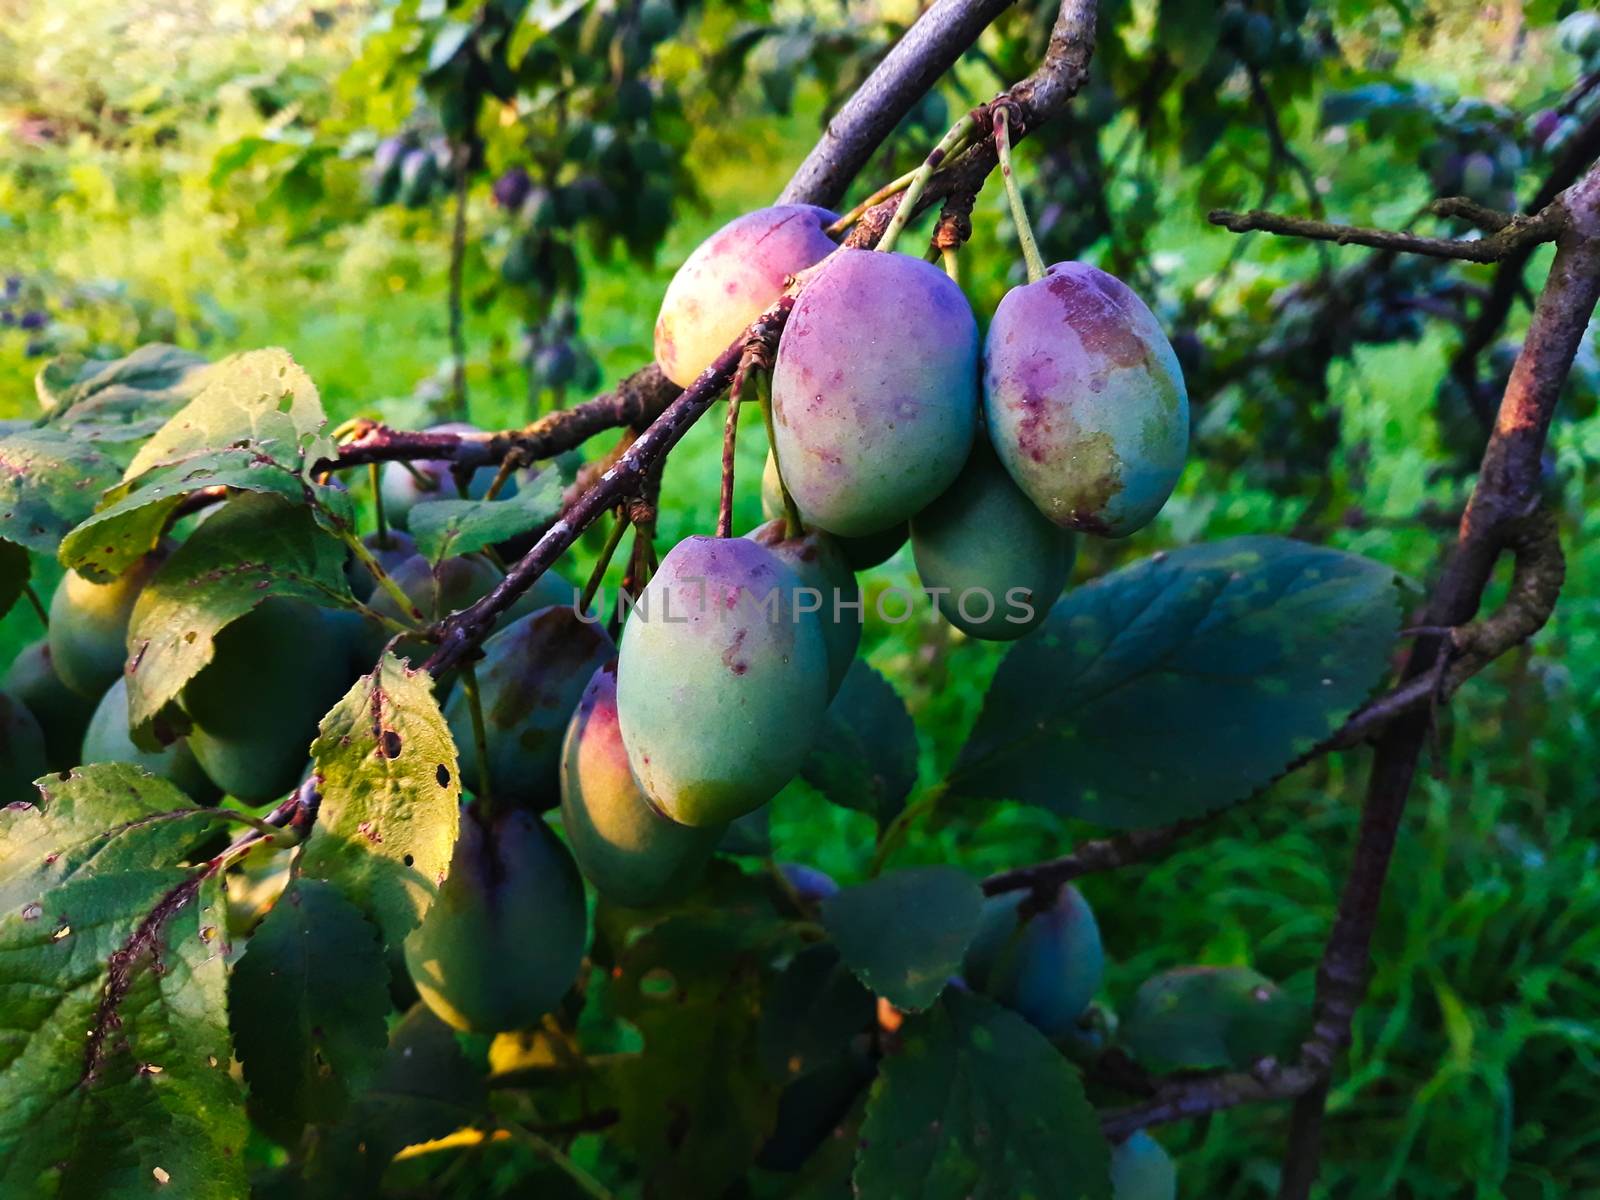 The plum fruit on the branch with the leaves on the tree, just beginning to get blue. In the orchard. Zavidovici, Bosnia and Herzegovina.